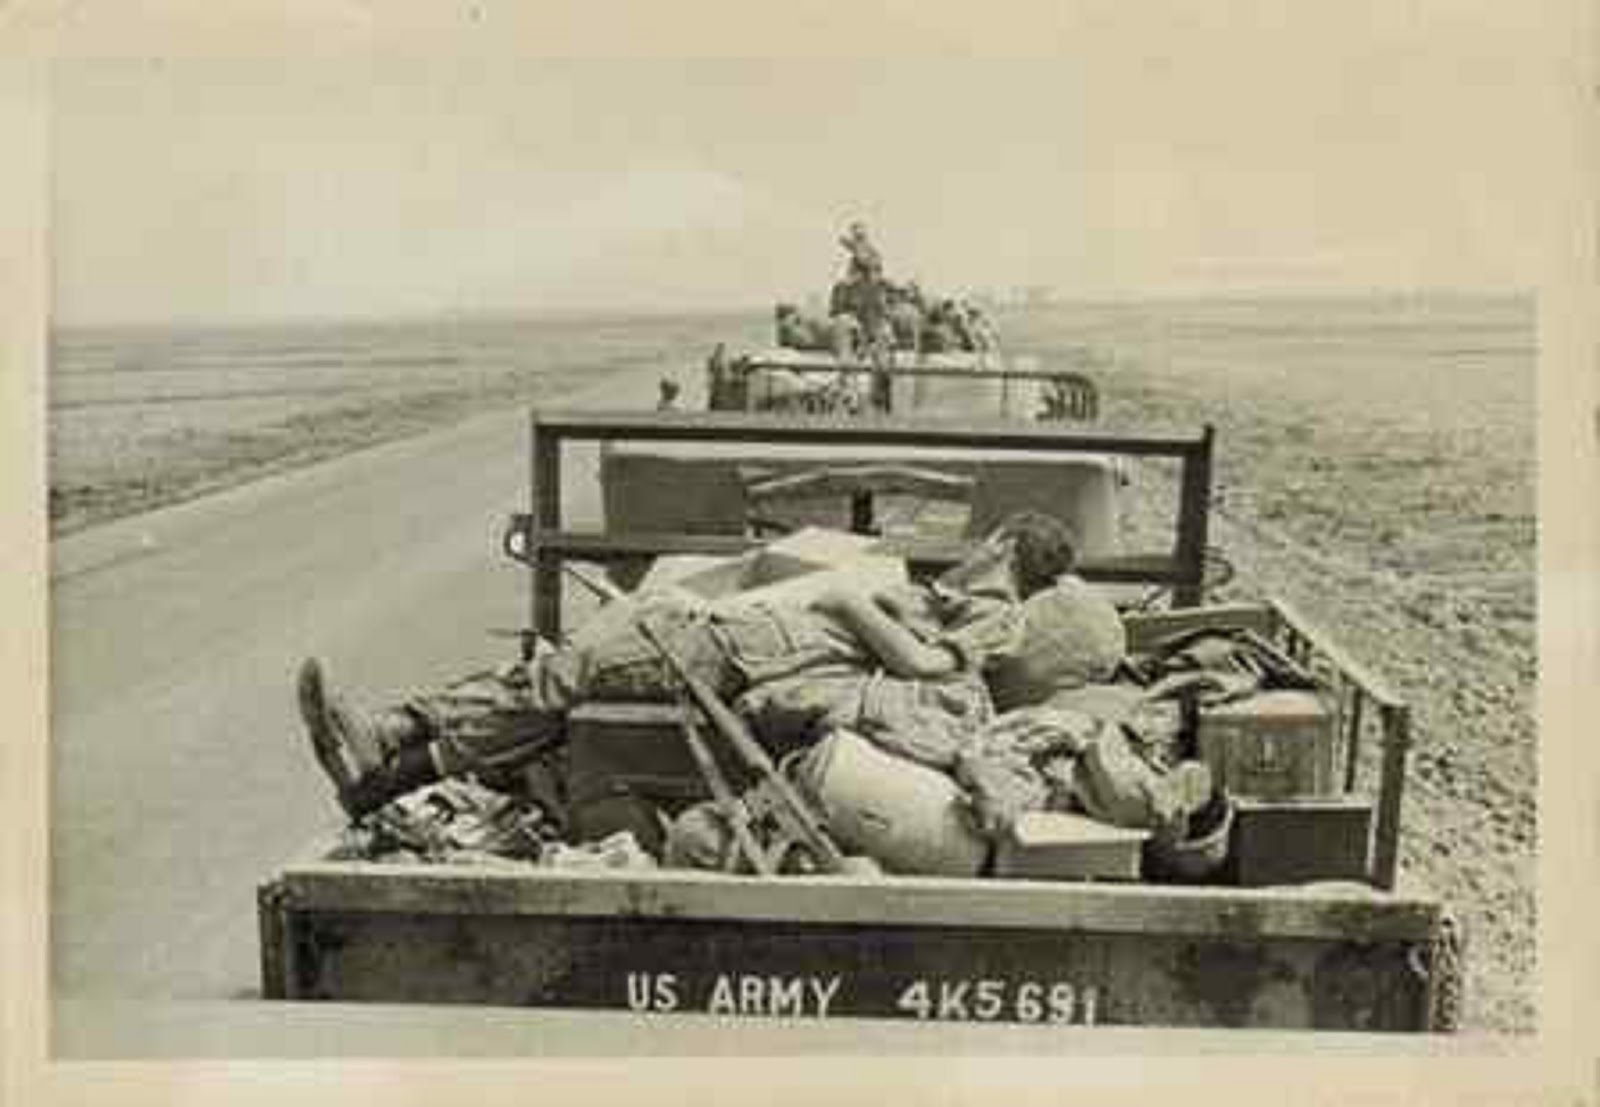 TRUCK LOAD OF DEAD BODIES FROM THE 199th LIGHT INFANTRY BRIGADE LEAVING THE BATTLEFIELD IN THE